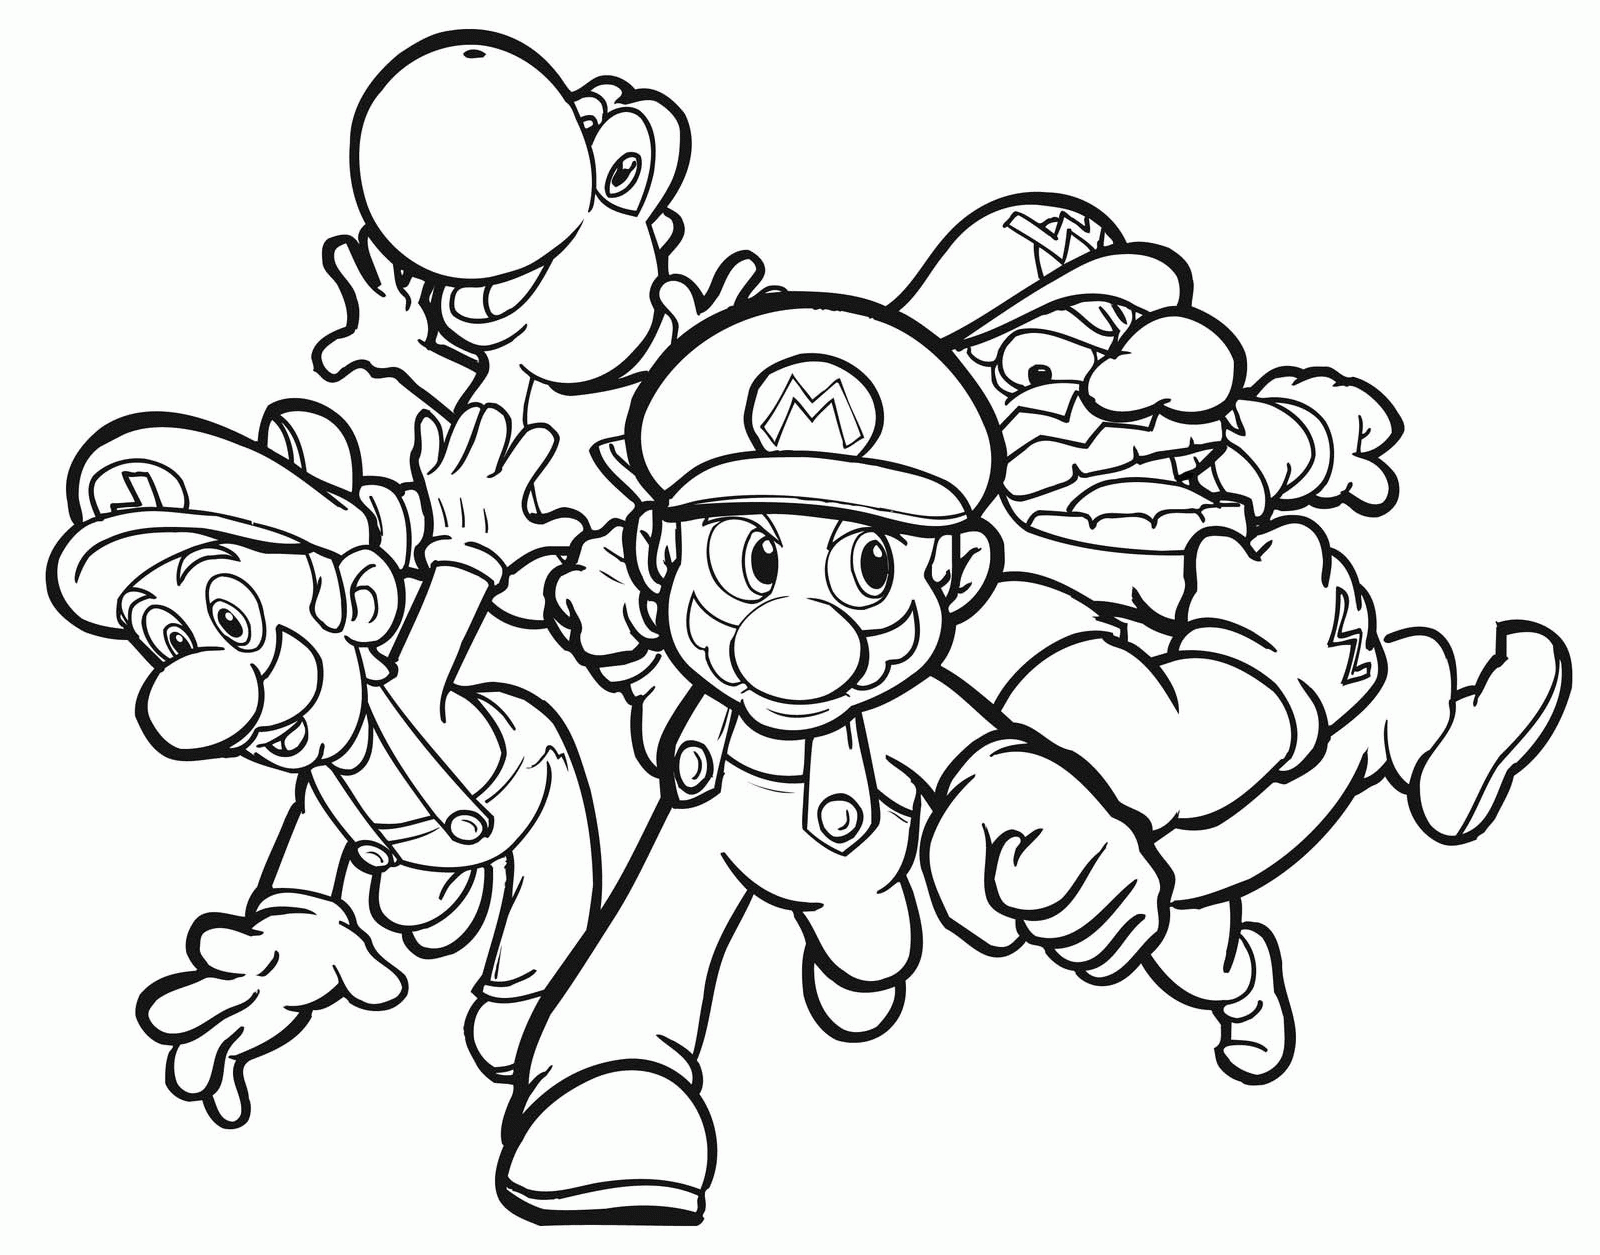 Mario And Luigi Coloring Pages Pdf Free